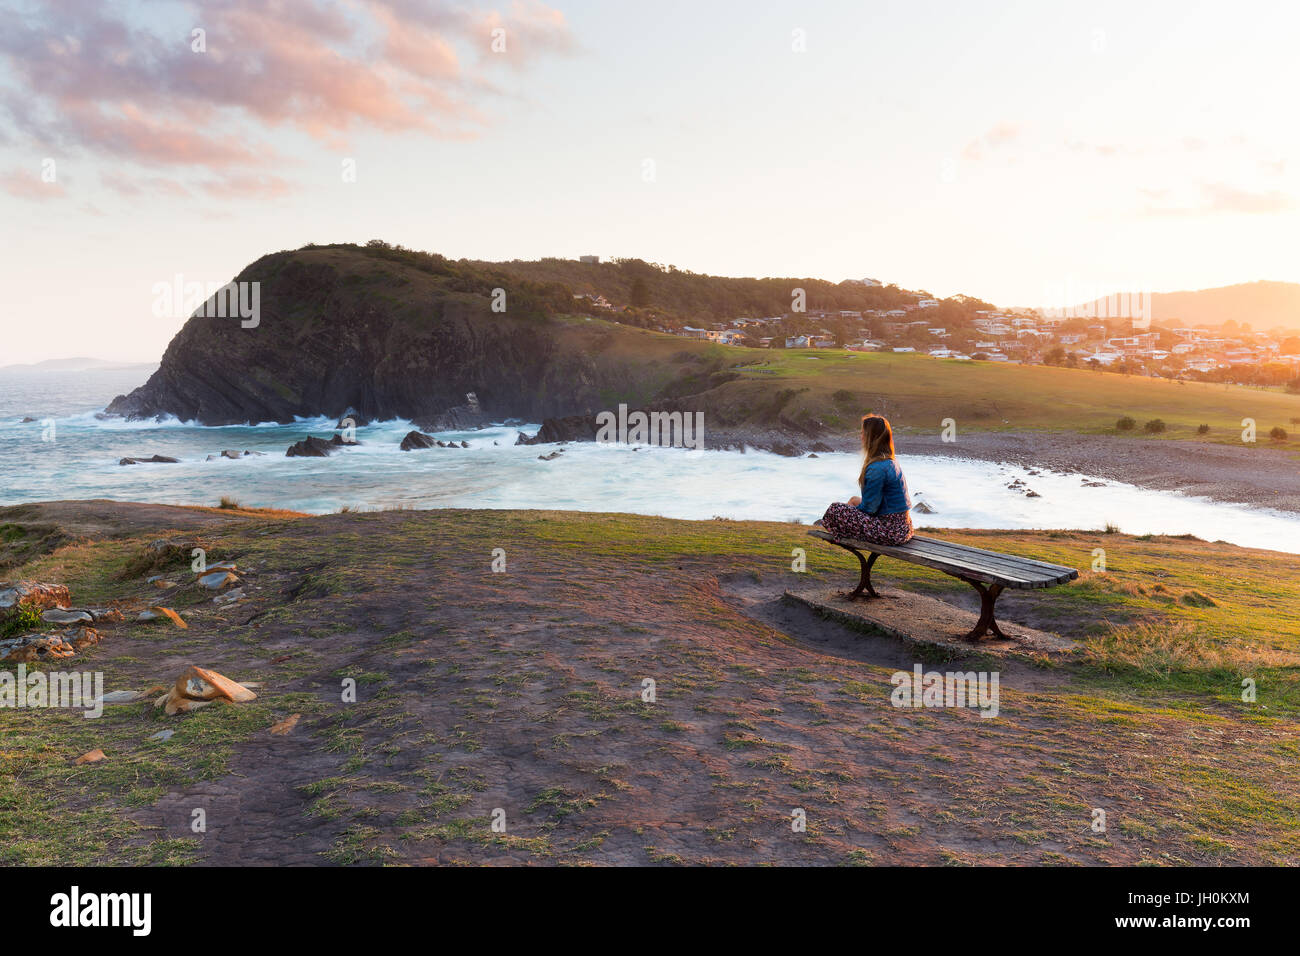 A woman sits on a wooden bench and watches the golden sun light disappearing from the beautiful coastline around her. Stock Photo